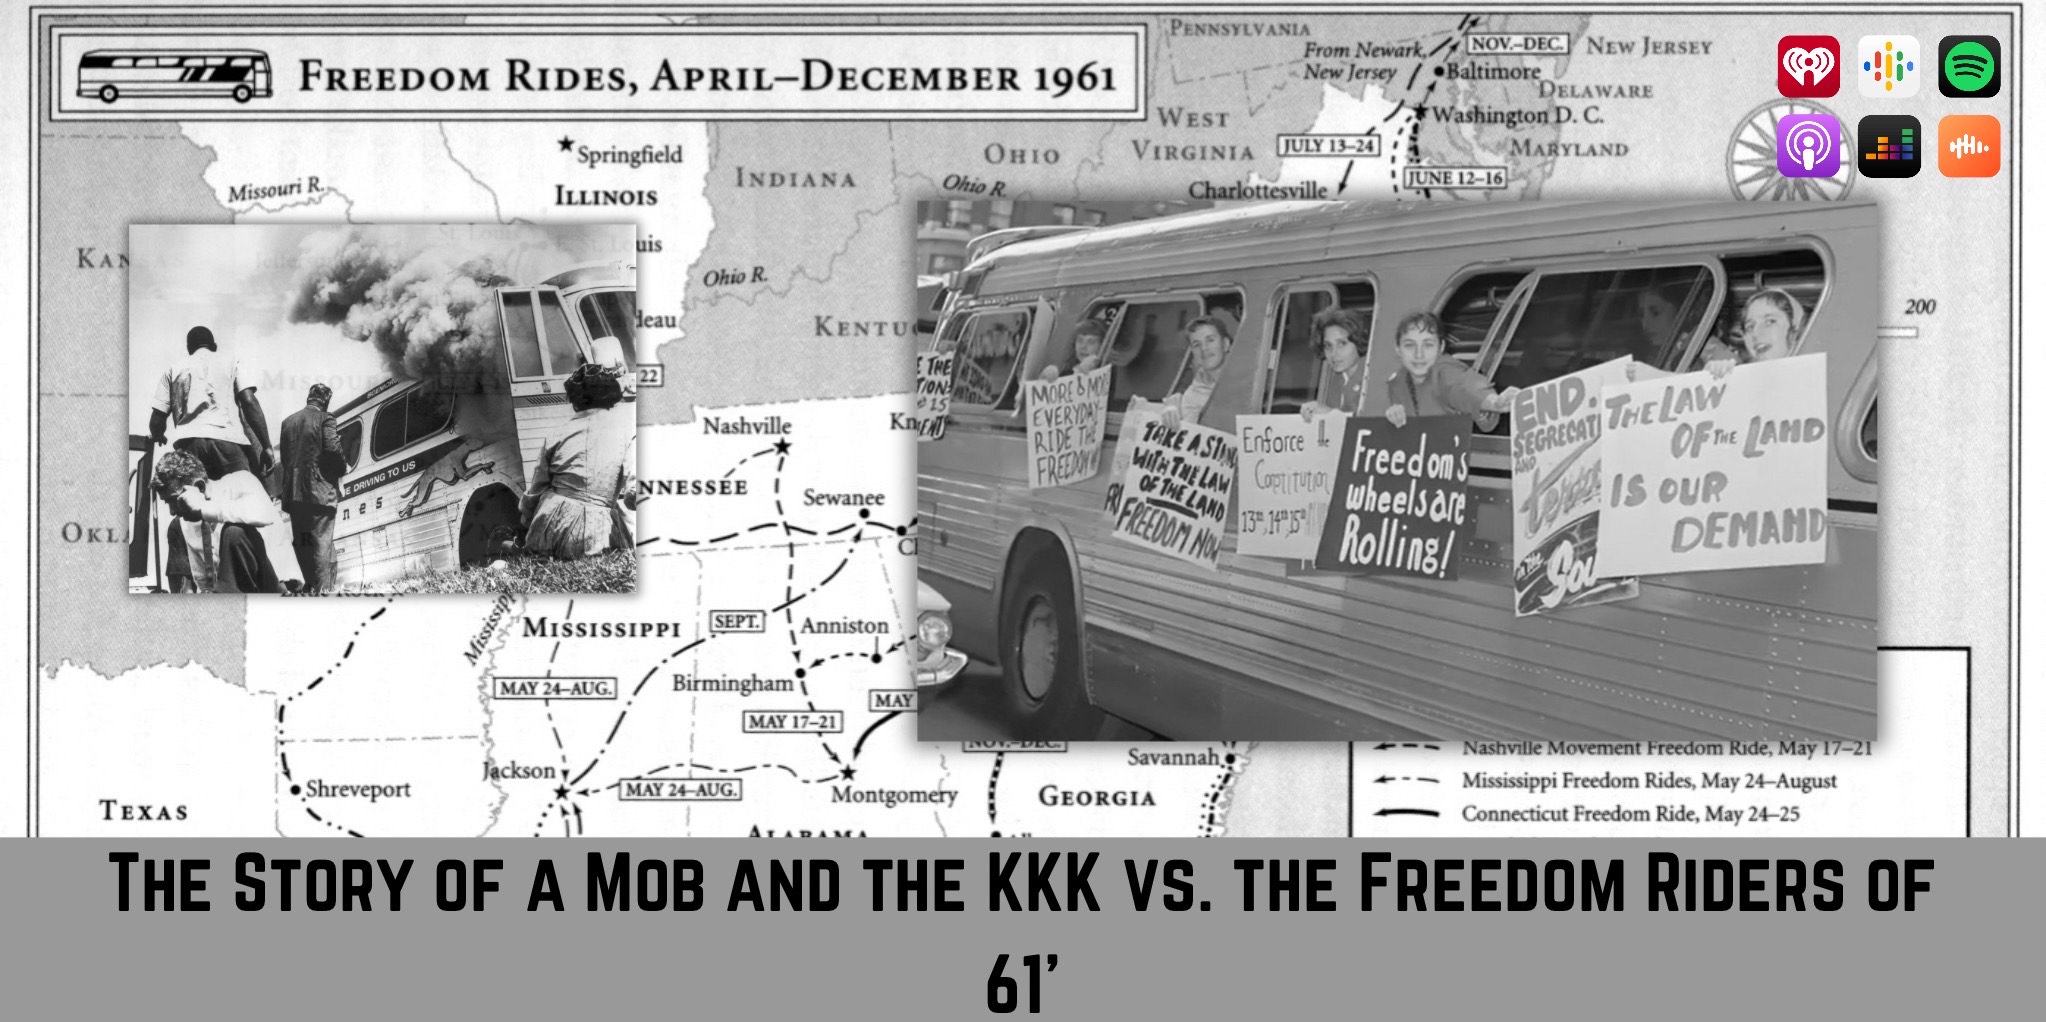 The Story of a Mob and the KKK vs. the Freedom Riders of 1961